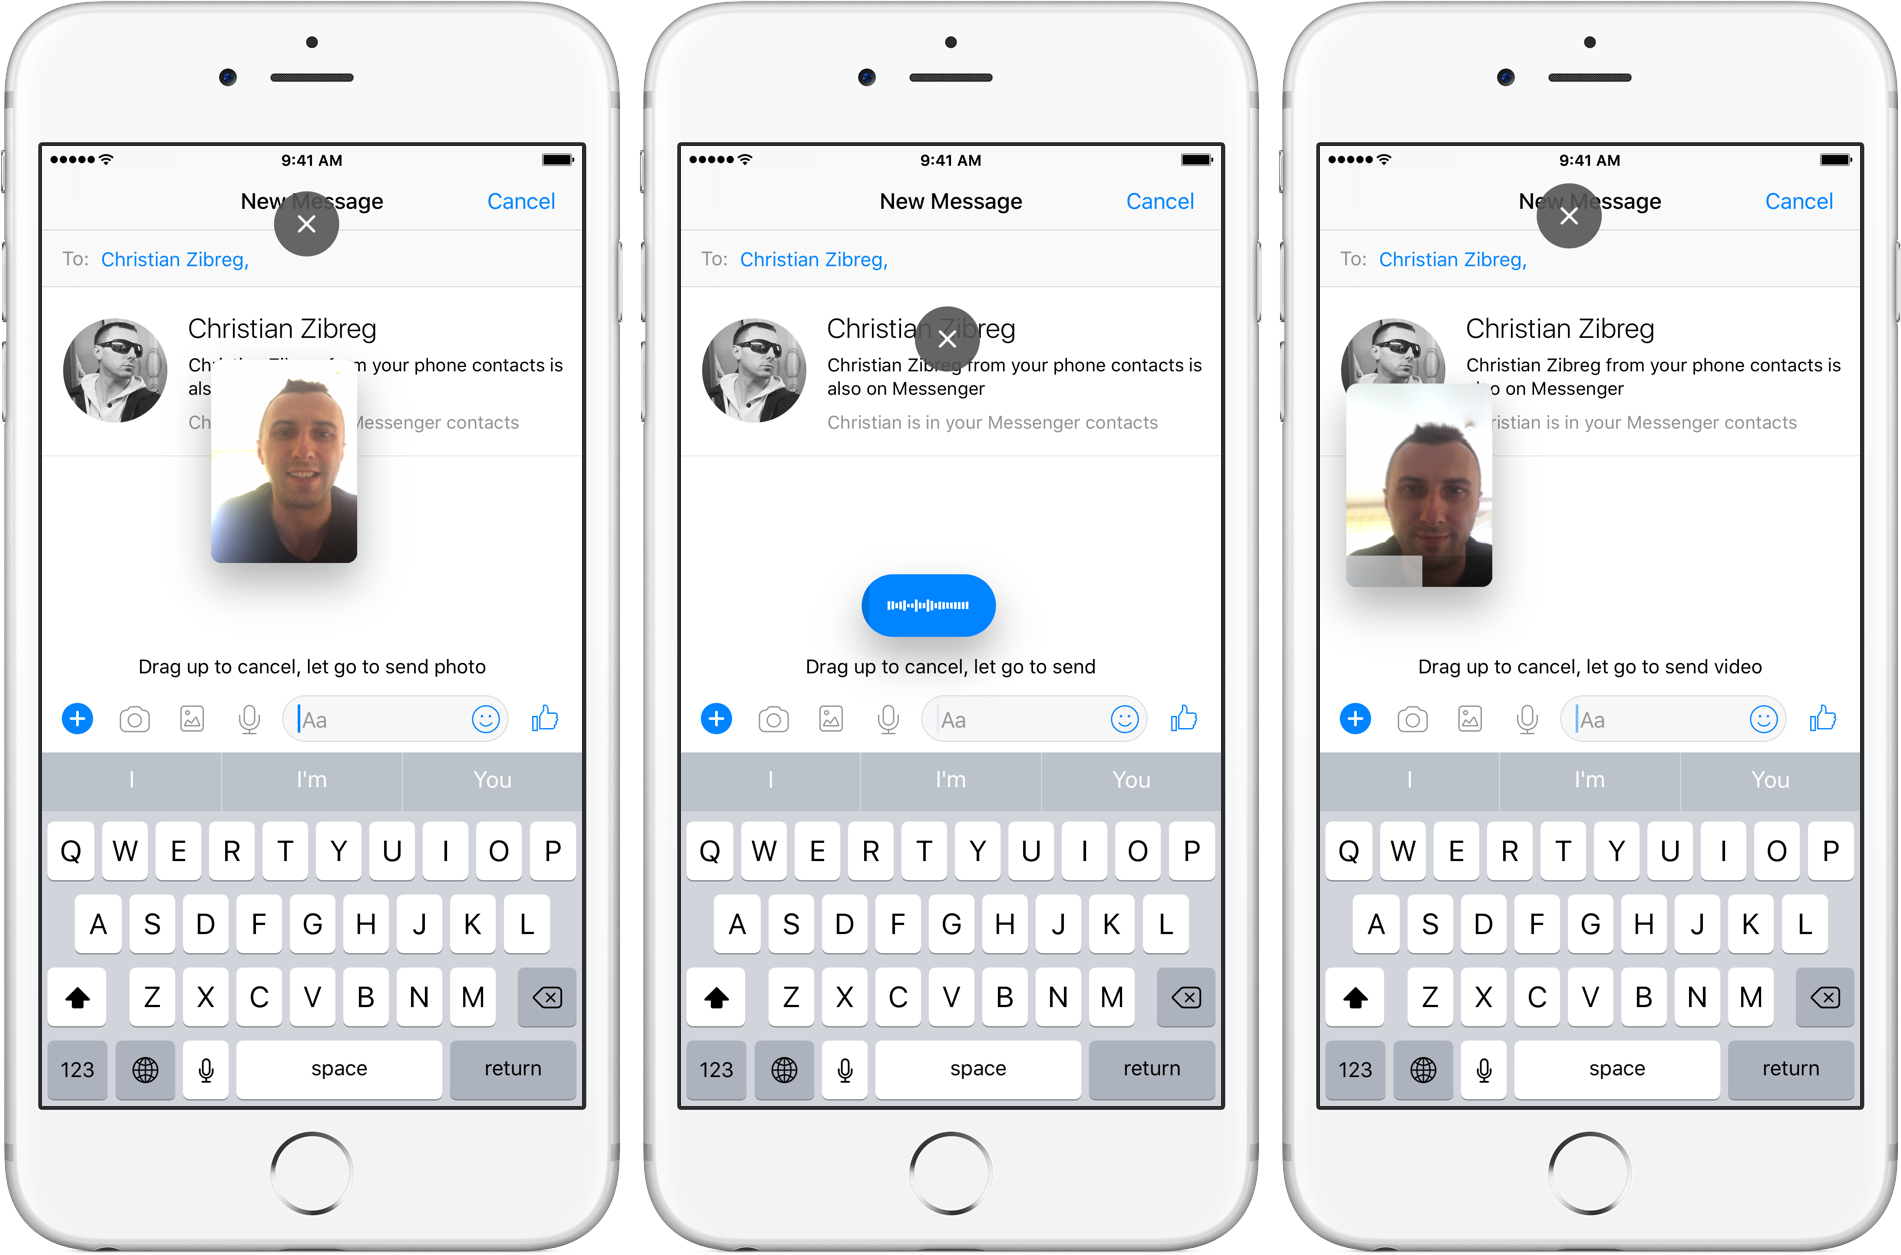 How To Block A Contact In Facebook Messenger On Iphone Or Ipad.